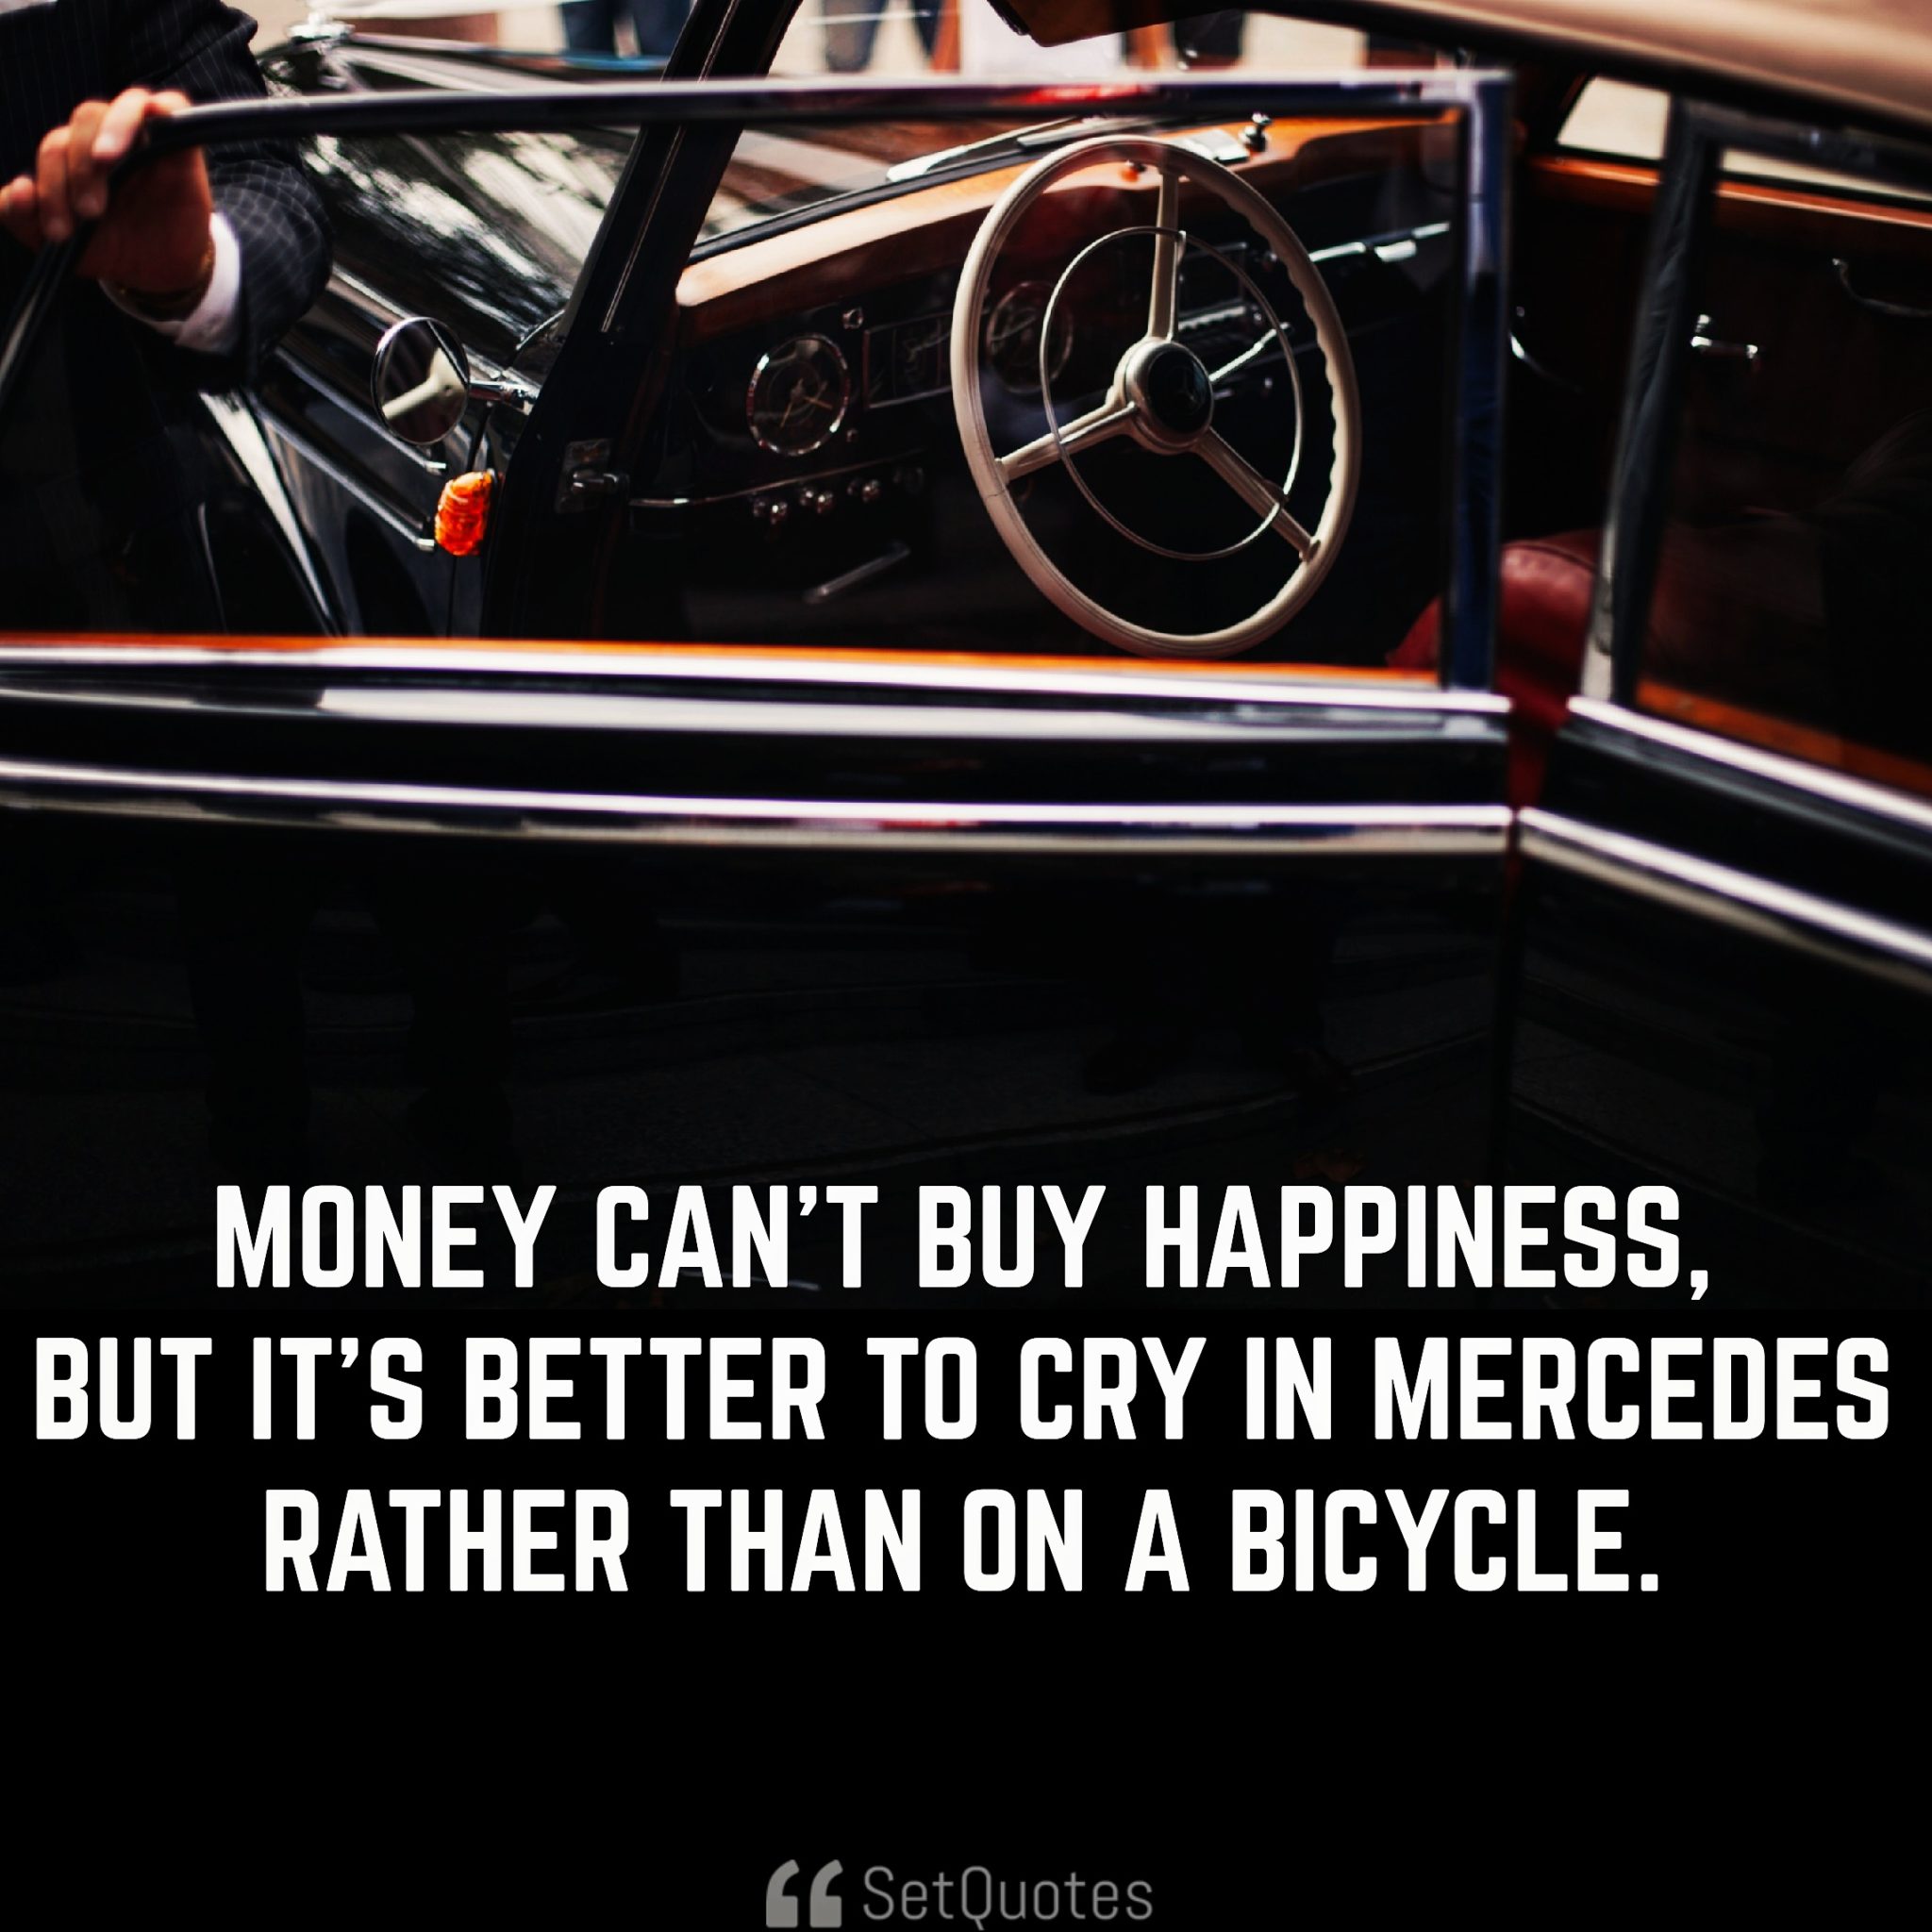 Money can’t buy happiness, but its better to cry in Mercedes rather than on a bicycle. - Money Doesn't Buy Happiness quotes